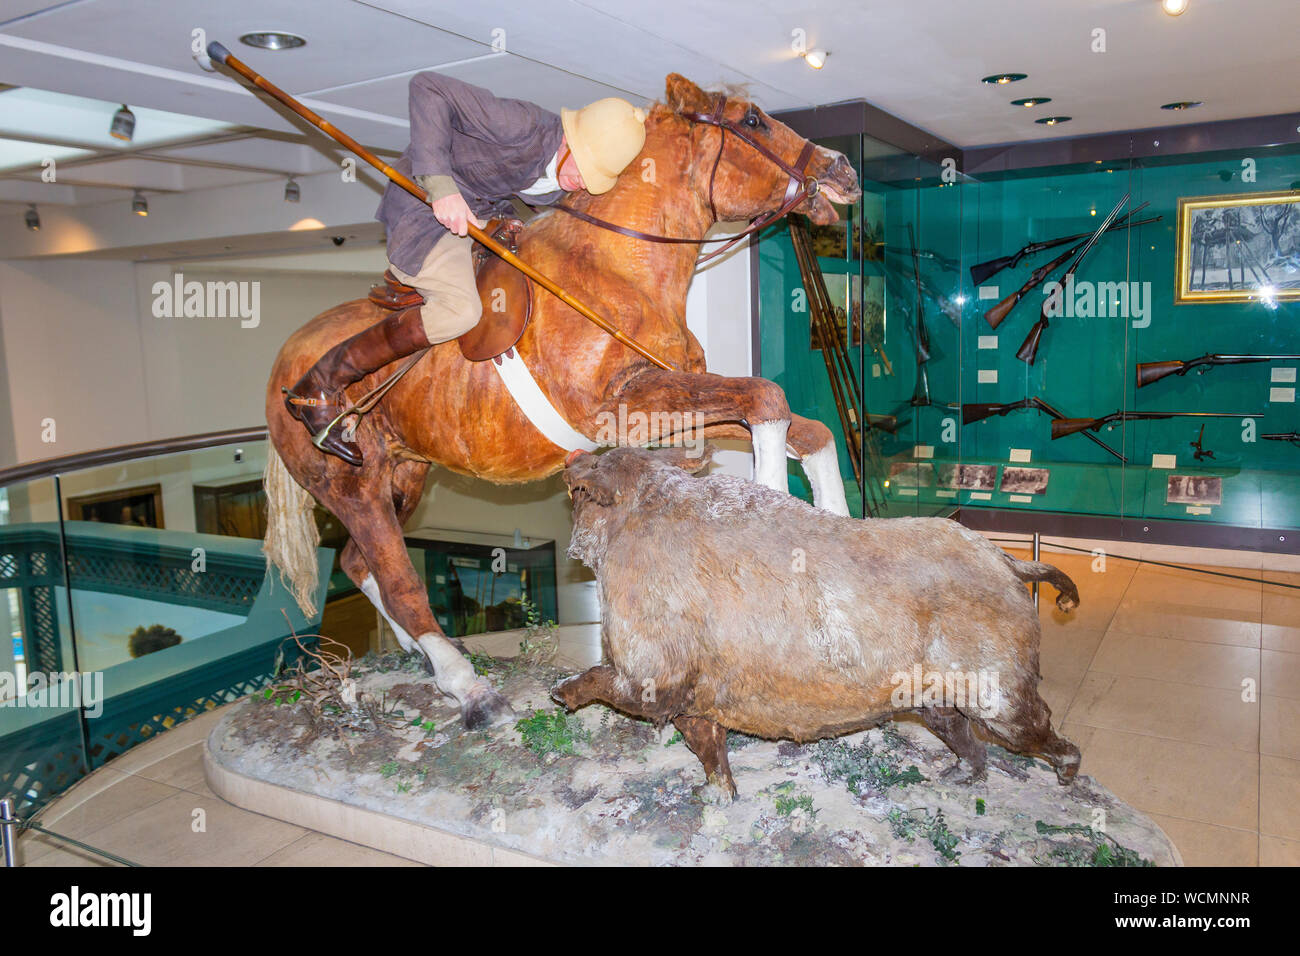 The Royal Armouries Museum, Leeds, West Yorkshire, England.  Exhibit in the Hunting gallery of a hunter spearing a boar. Stock Photo